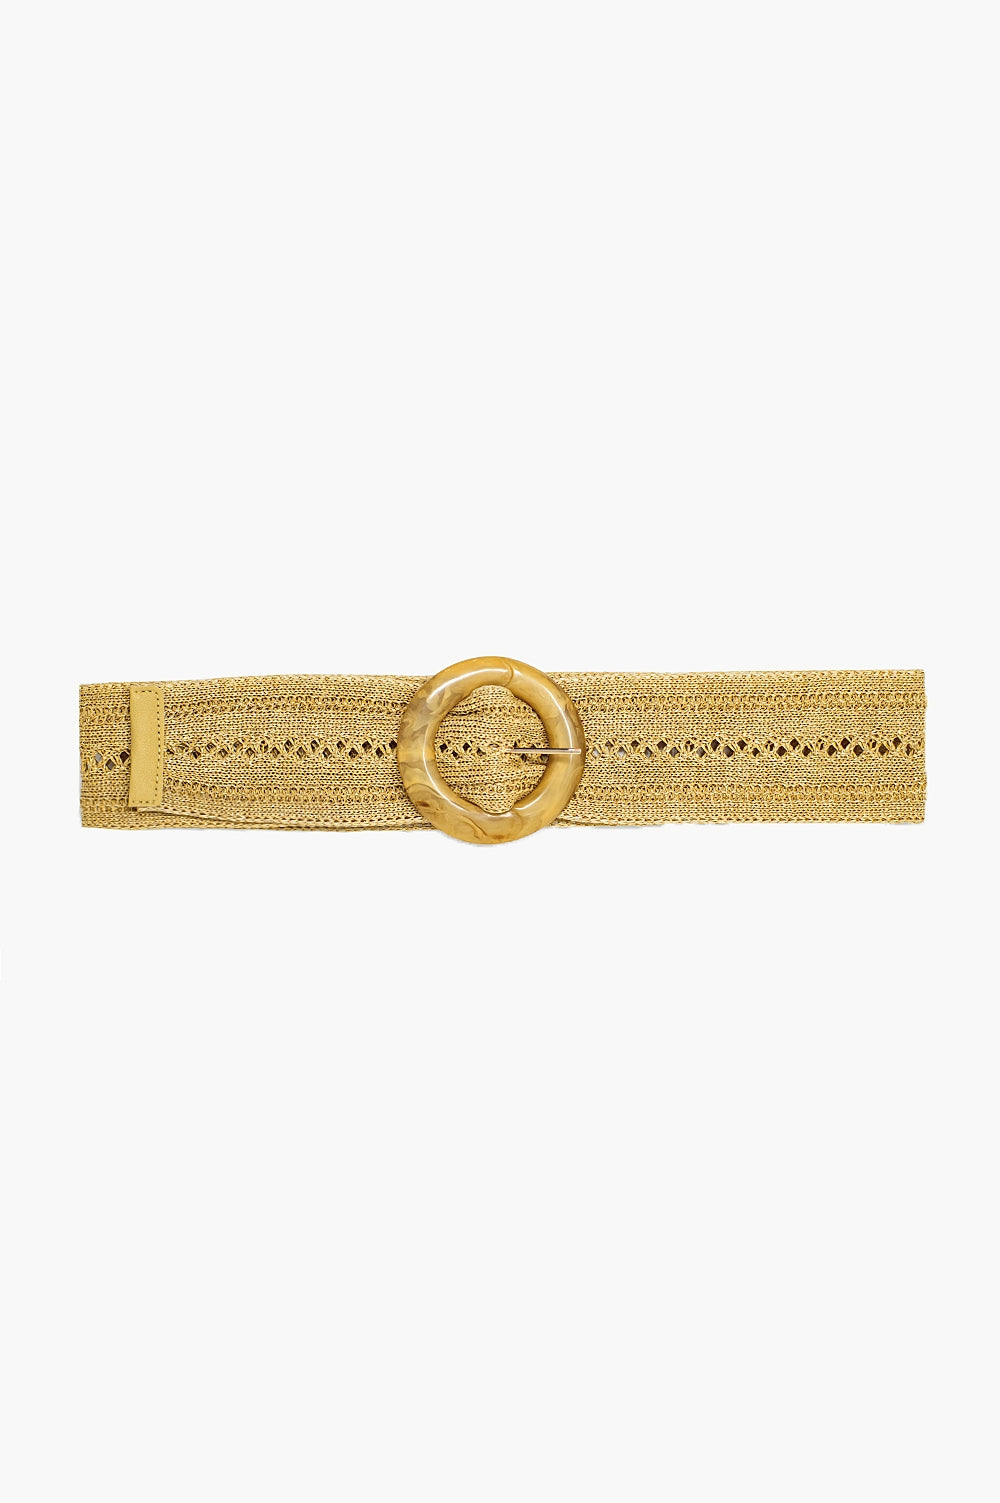 Q2 Creme woven belt with round buckle with marble effect